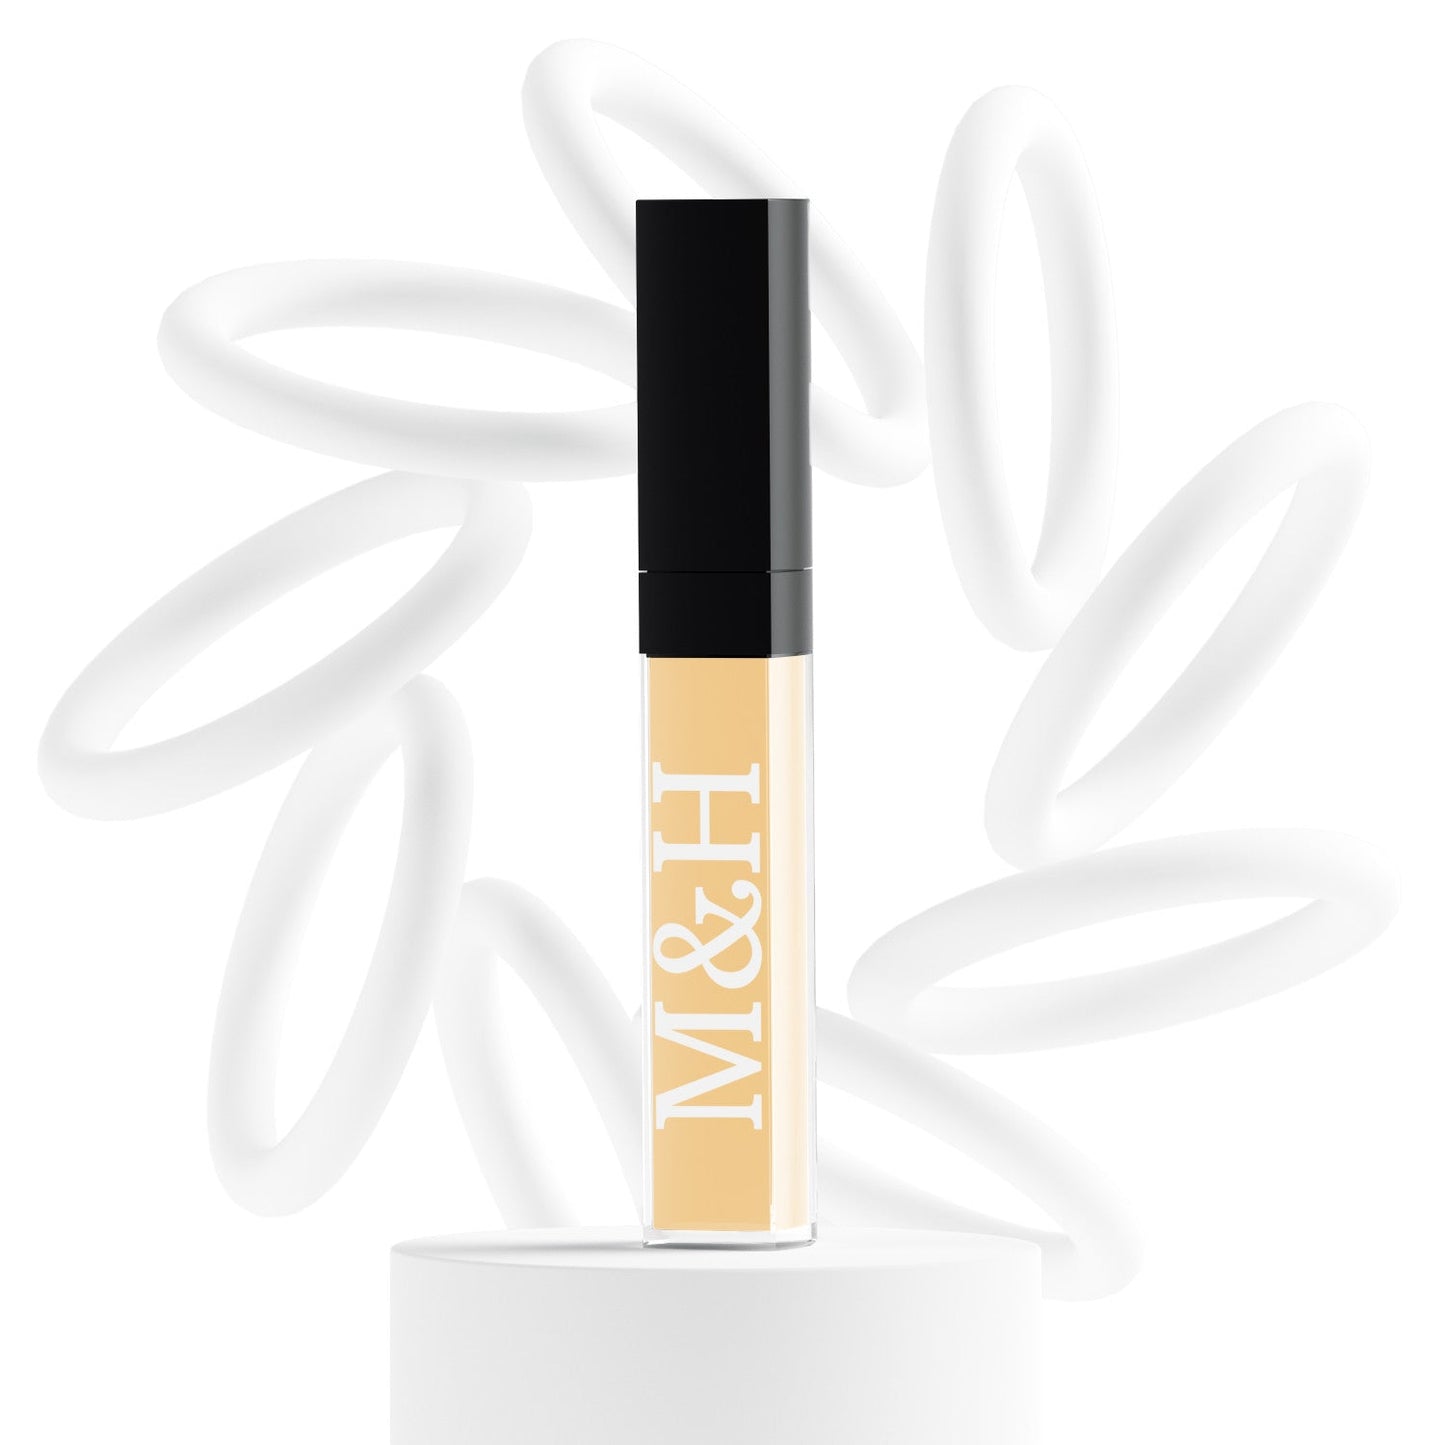 Vegan Concealers - M&H FashionVegan ConcealersconcealerM&H FashionM&H FashionConcealer-940Yellow CorrectorVegan ConcealersM&H FashionconcealerM&H Fashion This multifunctional concealer is designed to cover under-eye circles, complexion alterations, and major imperfections like scars, hyperpigmentation, burns, and tatVegan Concealers